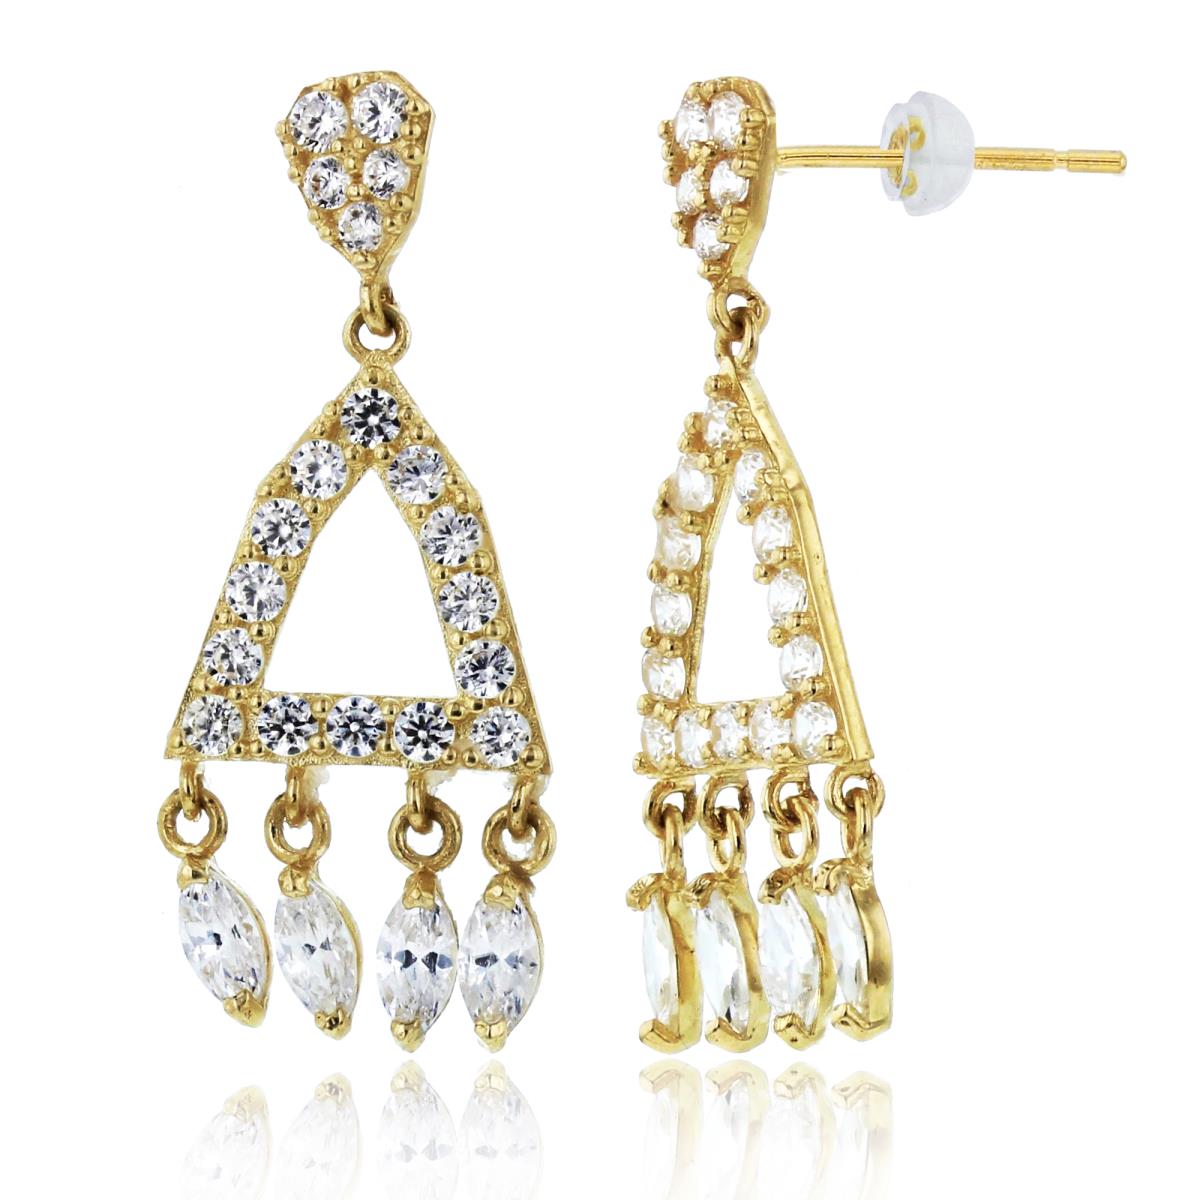 10K Yellow Gold MQ & Rnd CZ Chandelier Earrings with Silicone Backs